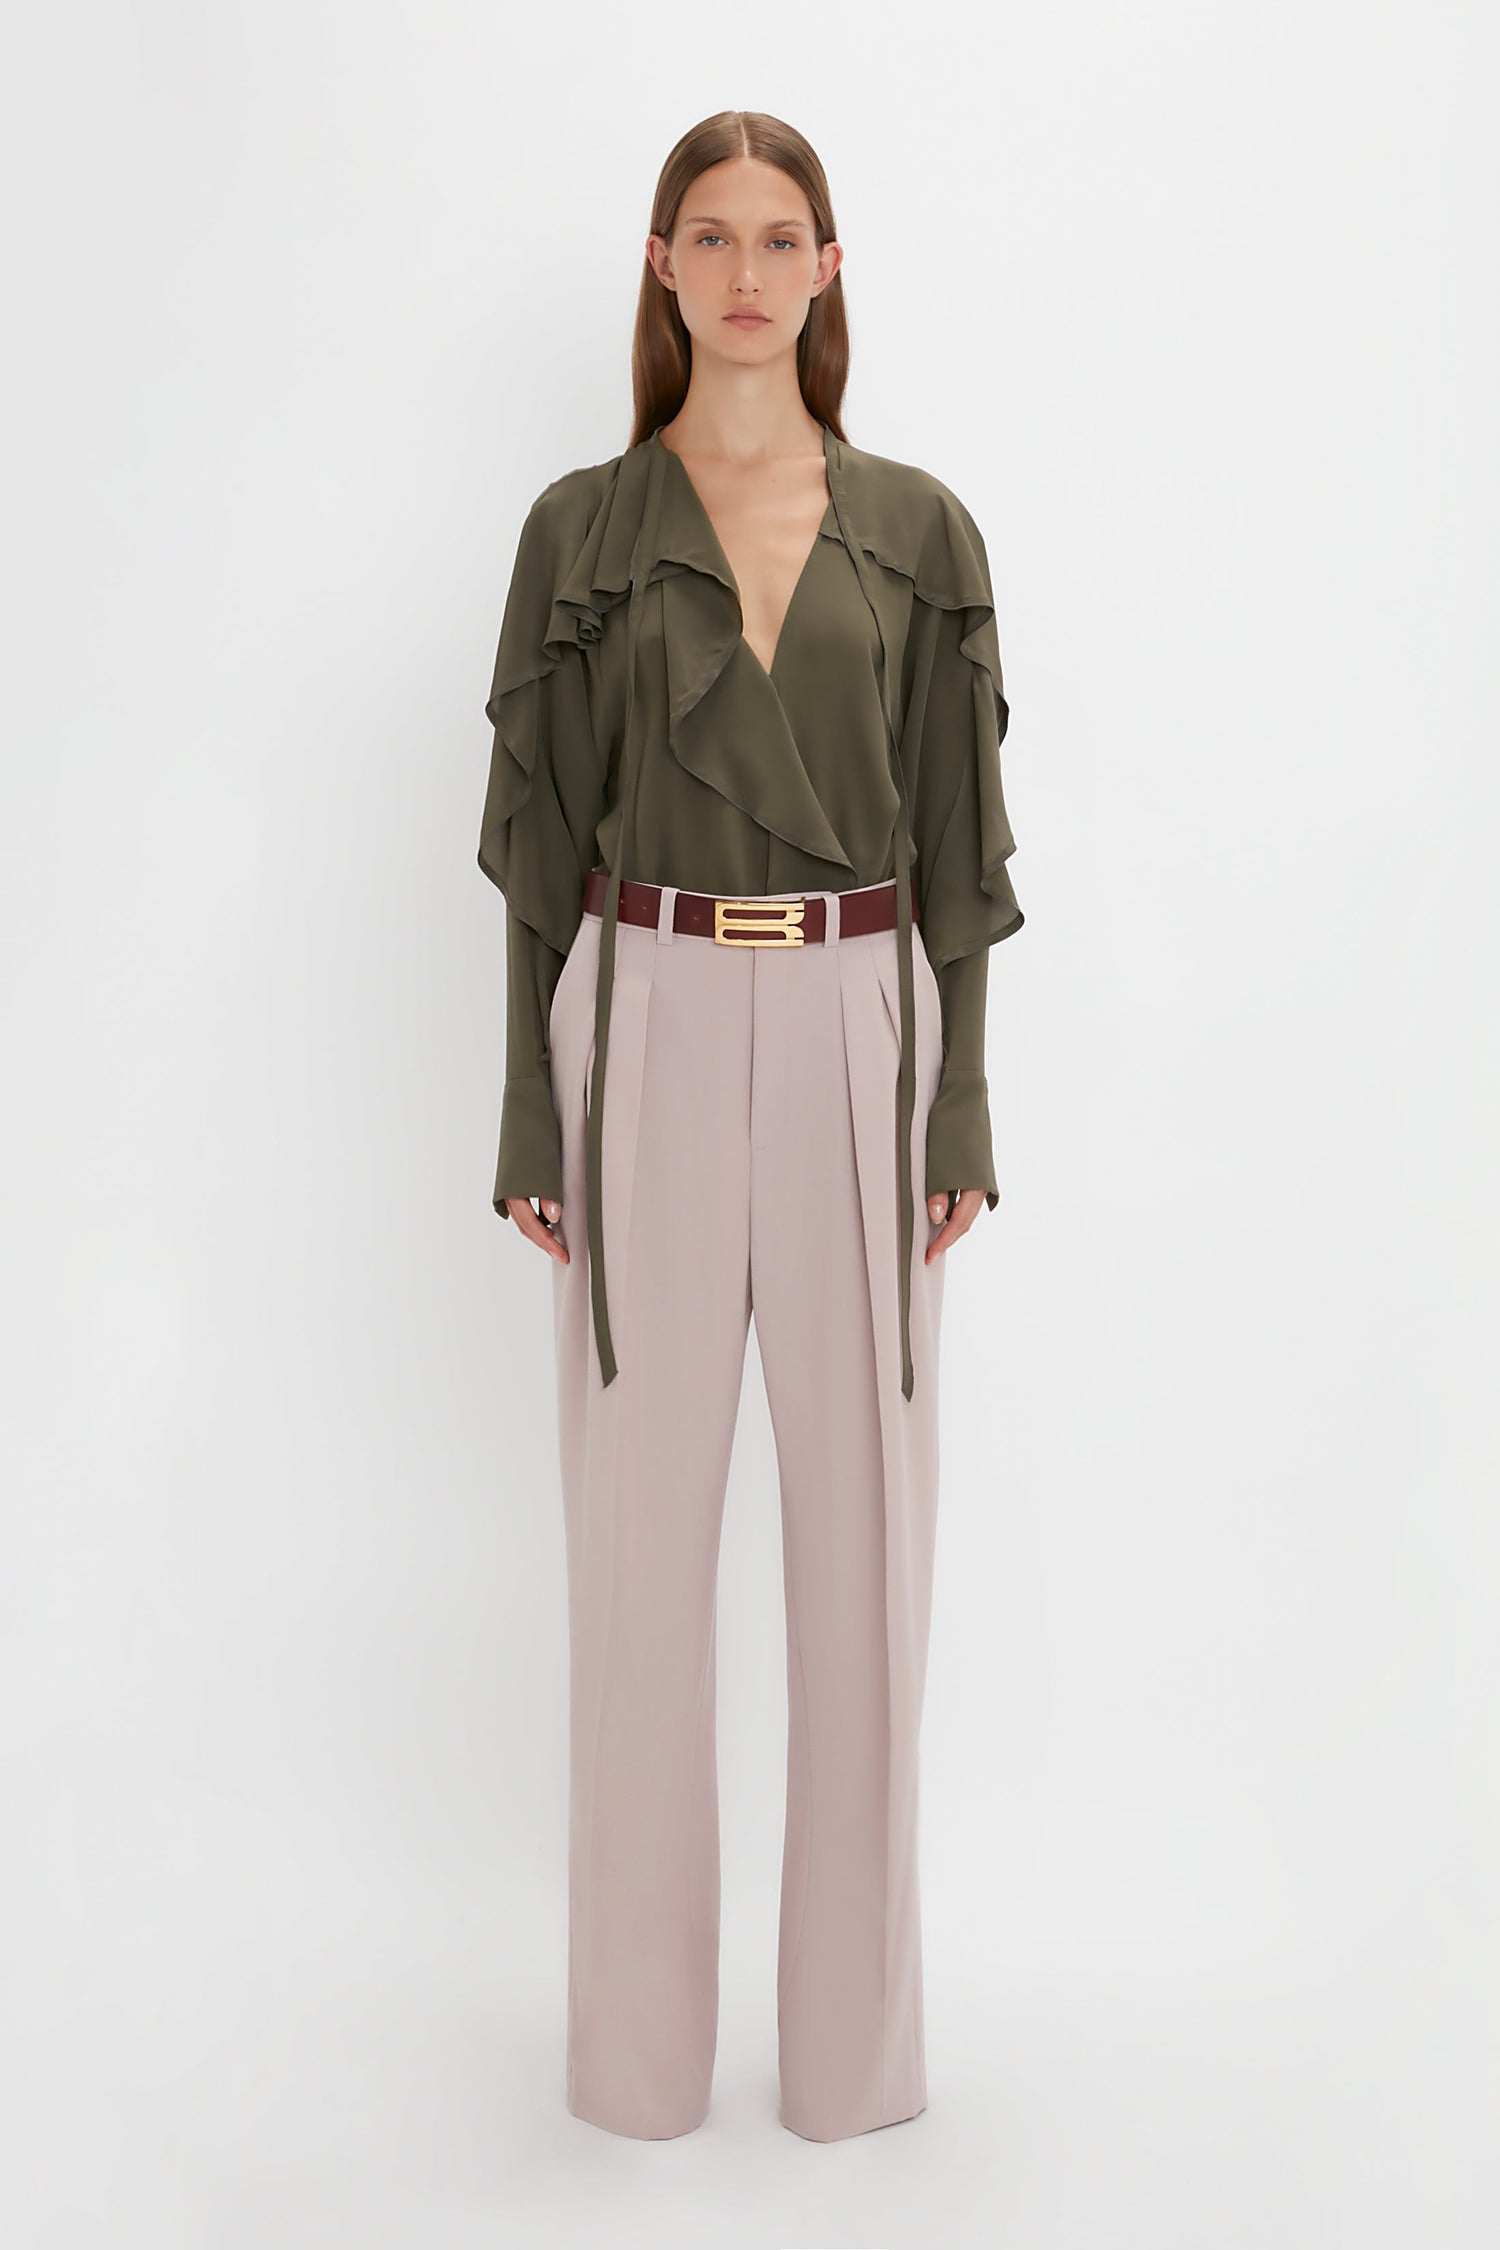 A woman with straight brown hair wears a green Tie Detail Ruffle Blouse in Oregano by Victoria Beckham, light pink wide-leg pants, and a maroon belt with a gold buckle, standing against a plain white background.